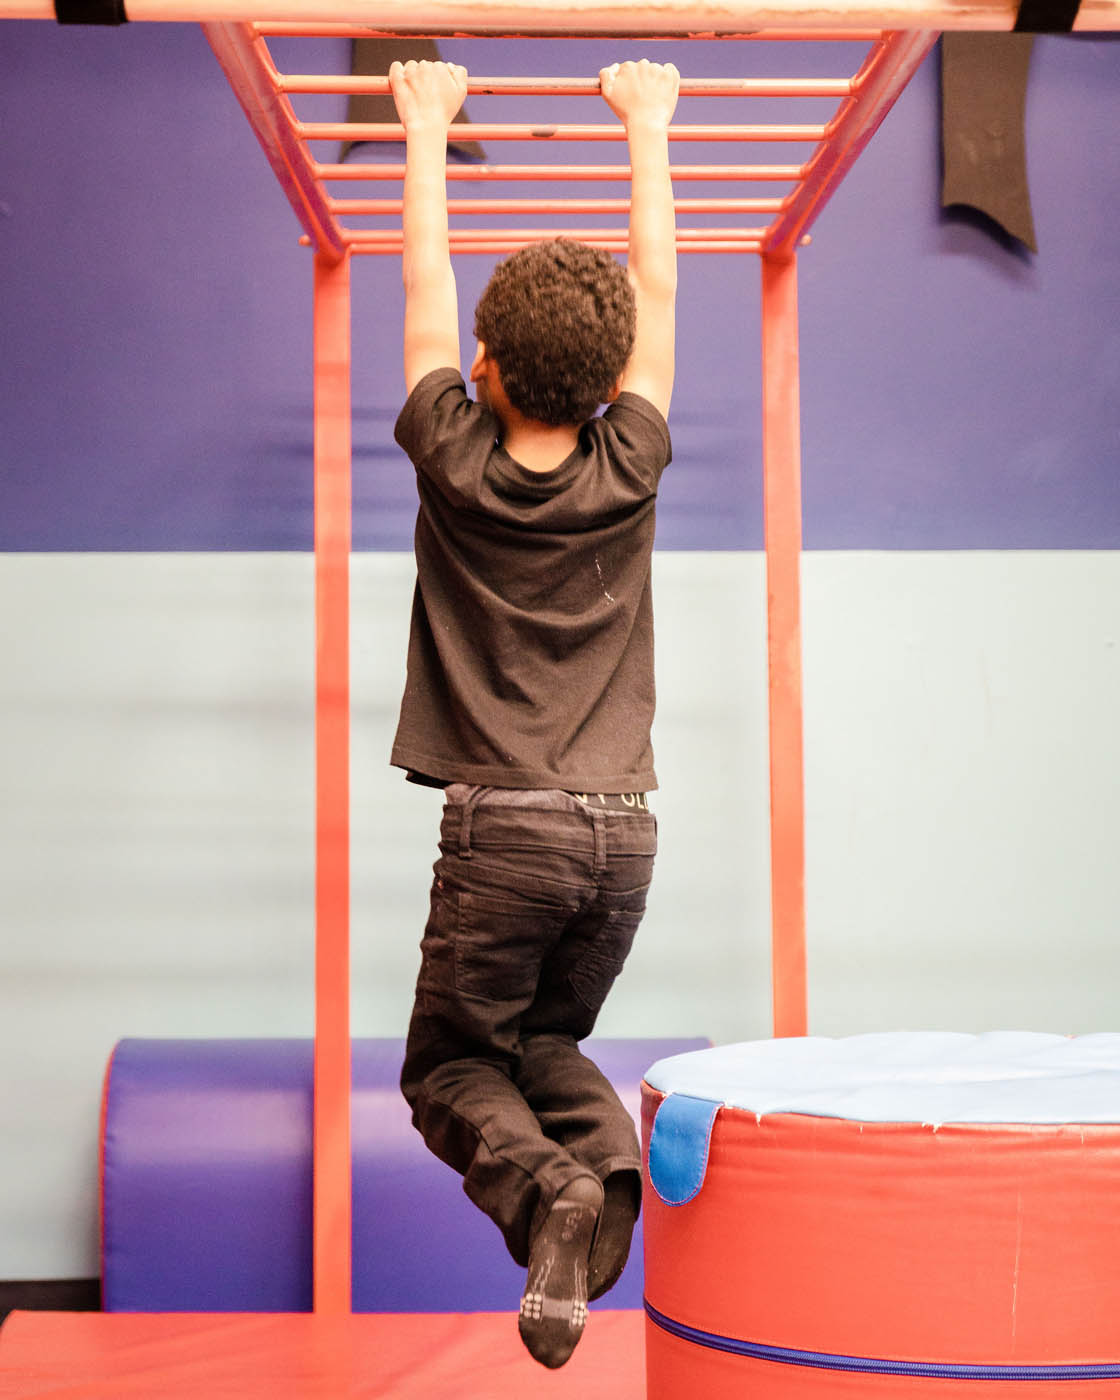 A little boy hanging on monkey bars, contact us today about our baby groups in Glen Allen, VA.